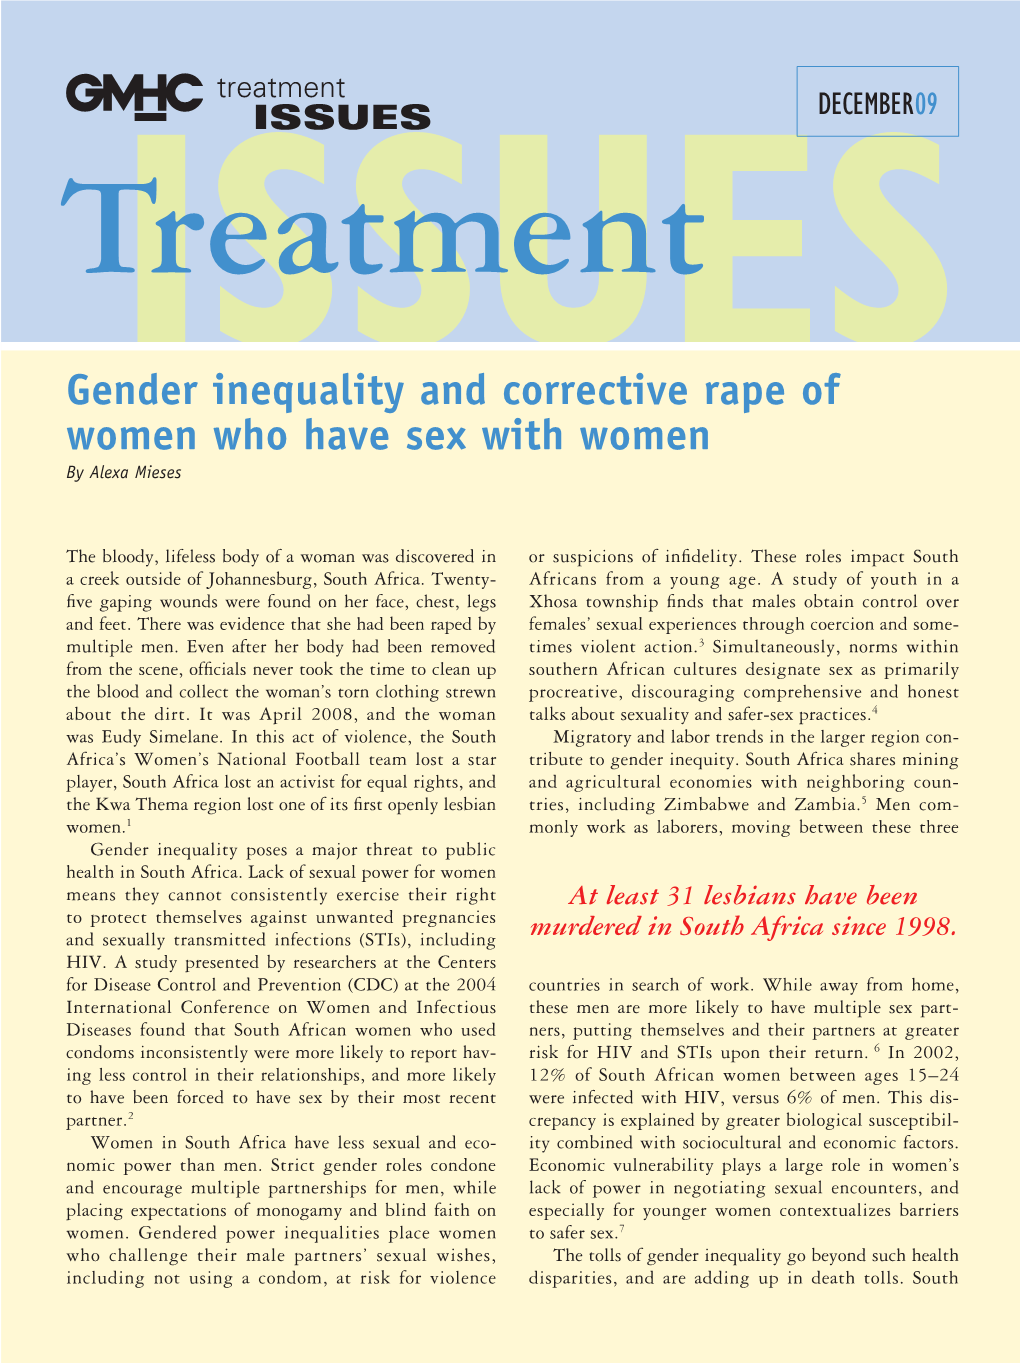 Gender Inequality and Corrective Rape of Women Who Have Sex with Women